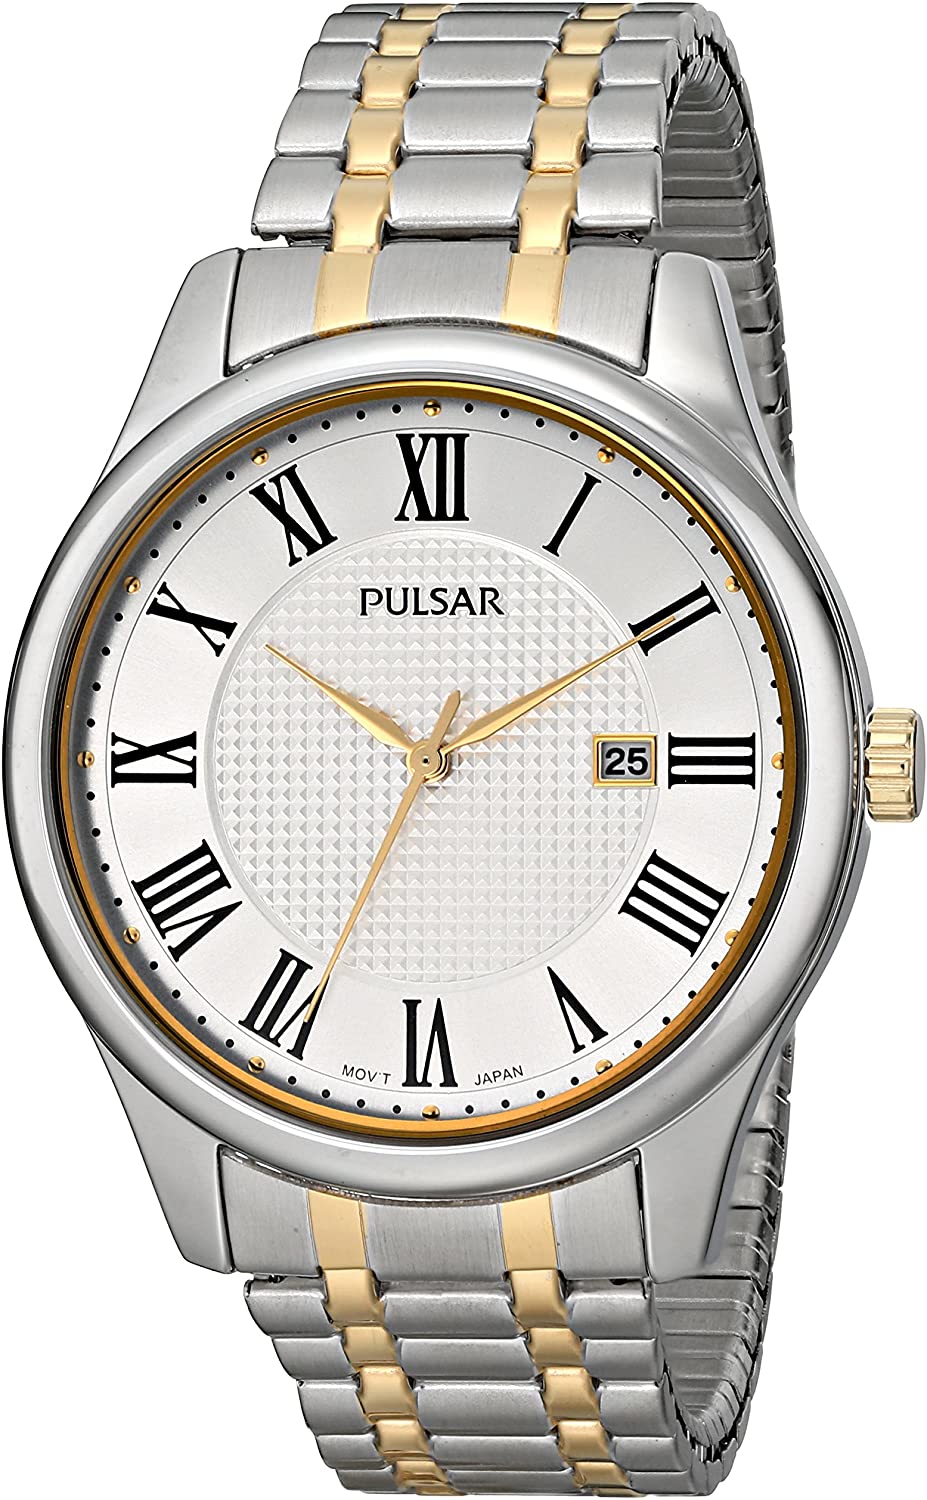 Pulsar Men's PH9041 Traditional Collection Analog Display Japanese Quartz Silver Watch